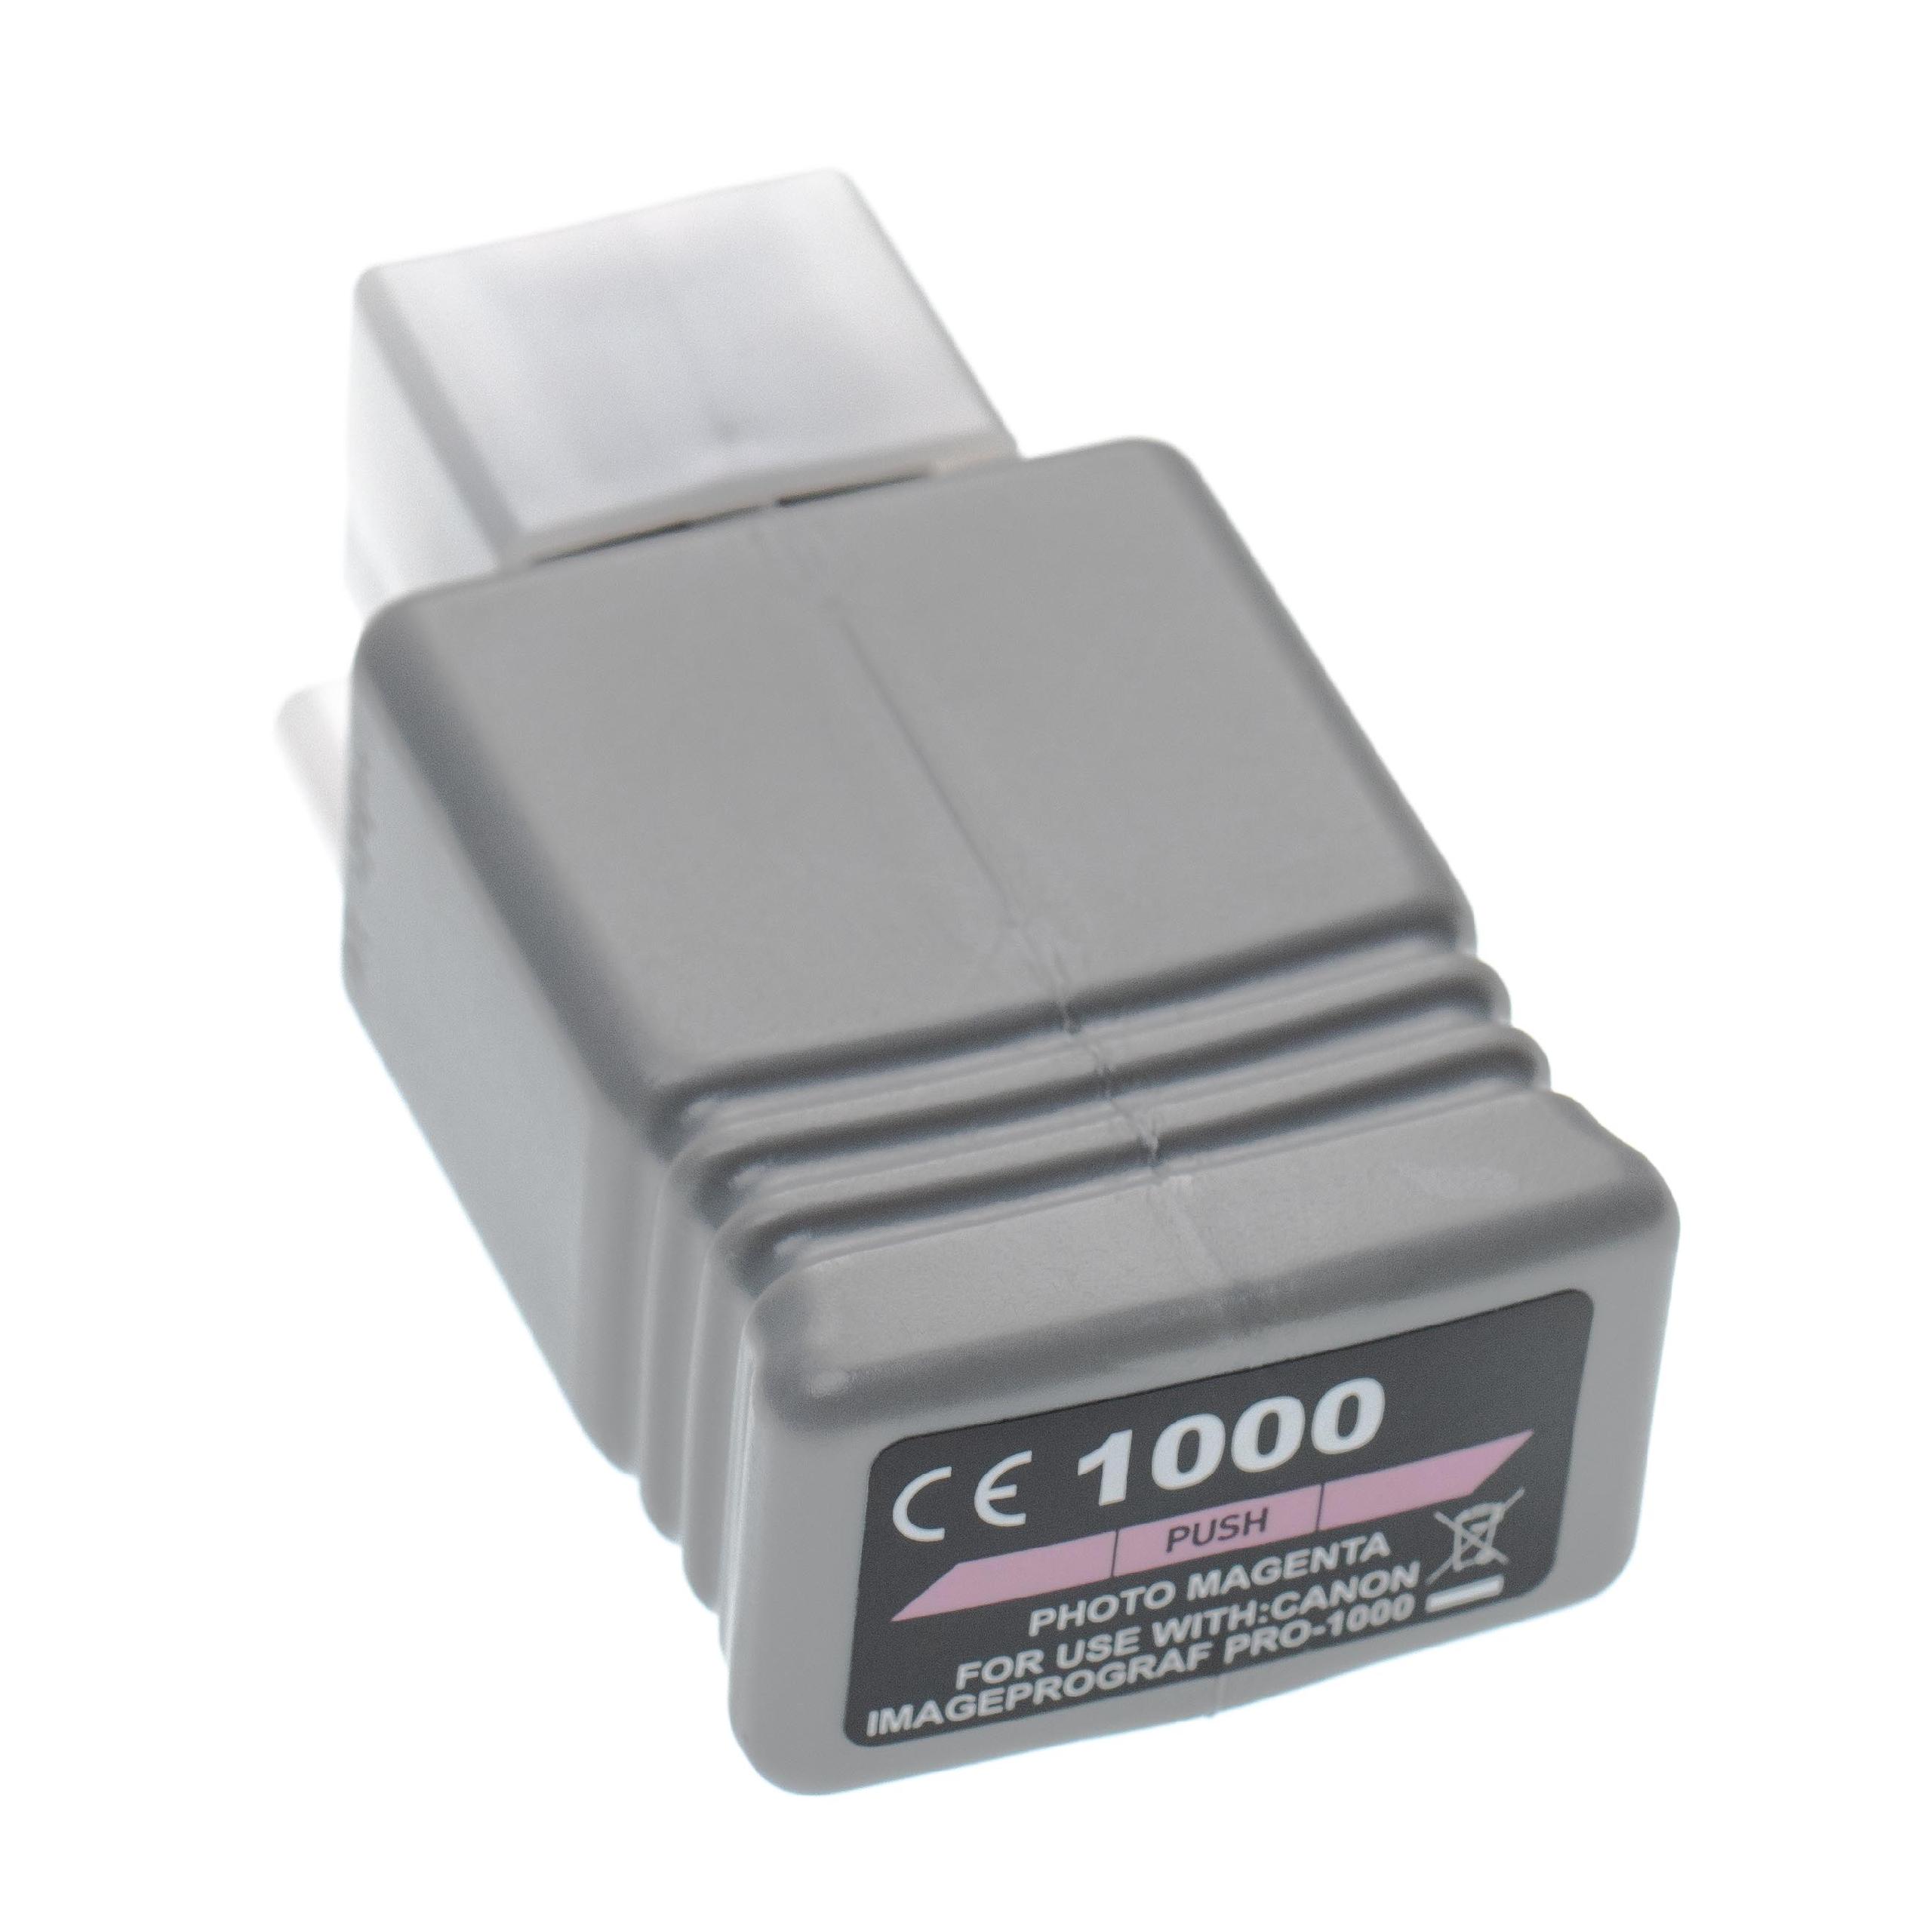 Ink Cartridge as Exchange for Canon PFI-1000PM, PFI-1000 PM for Canon Printer - 80 ml + Chip